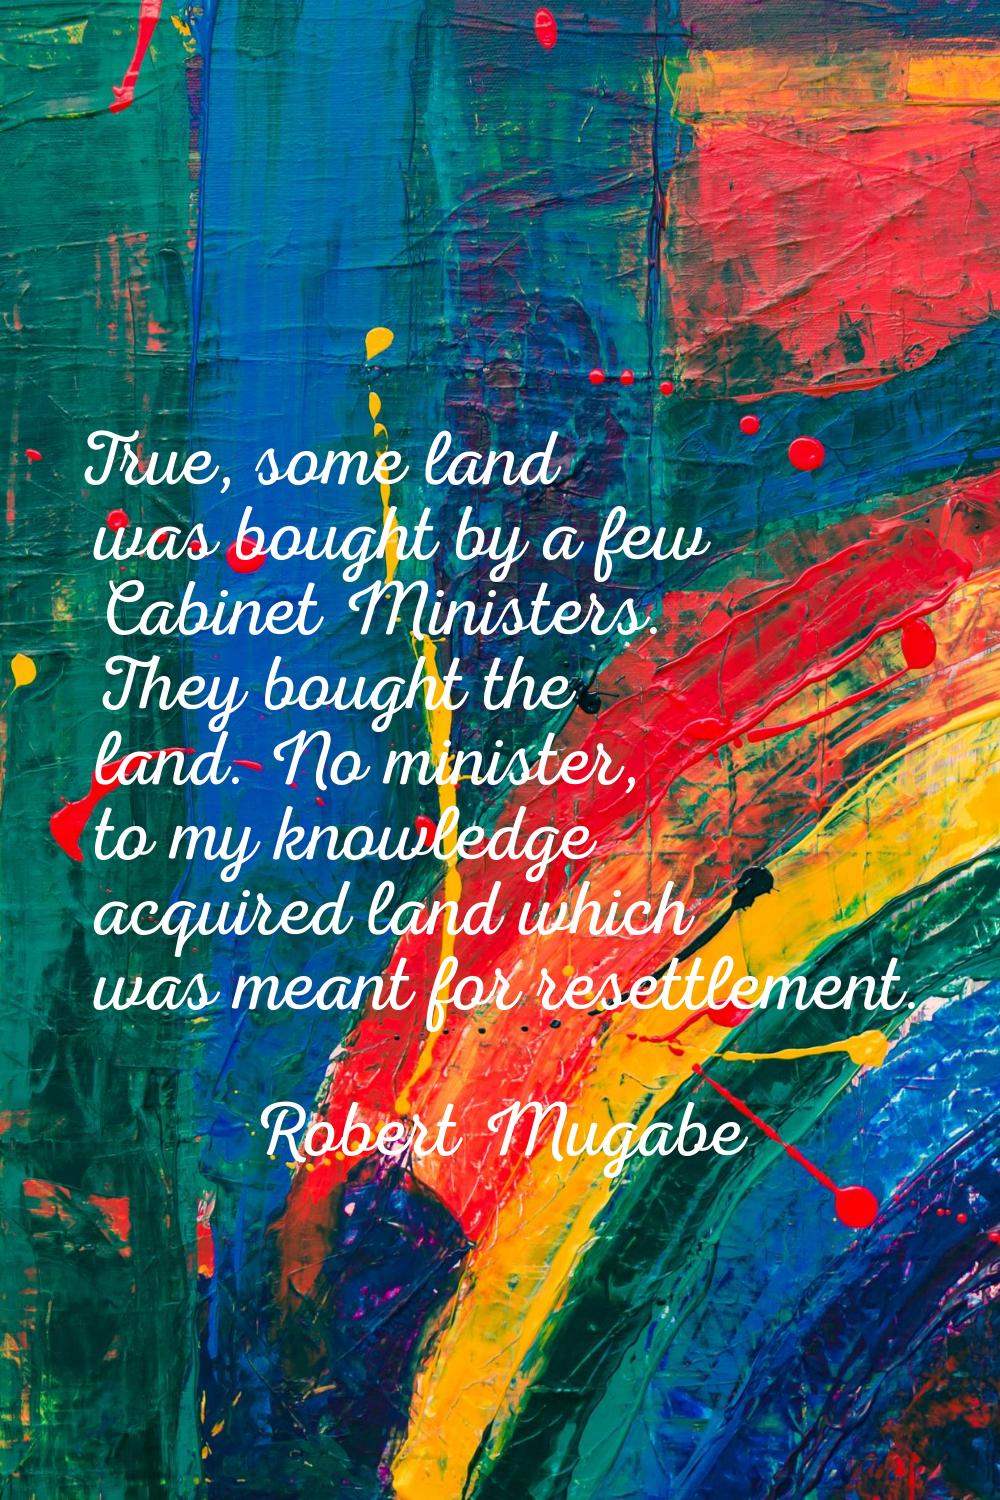 True, some land was bought by a few Cabinet Ministers. They bought the land. No minister, to my kno